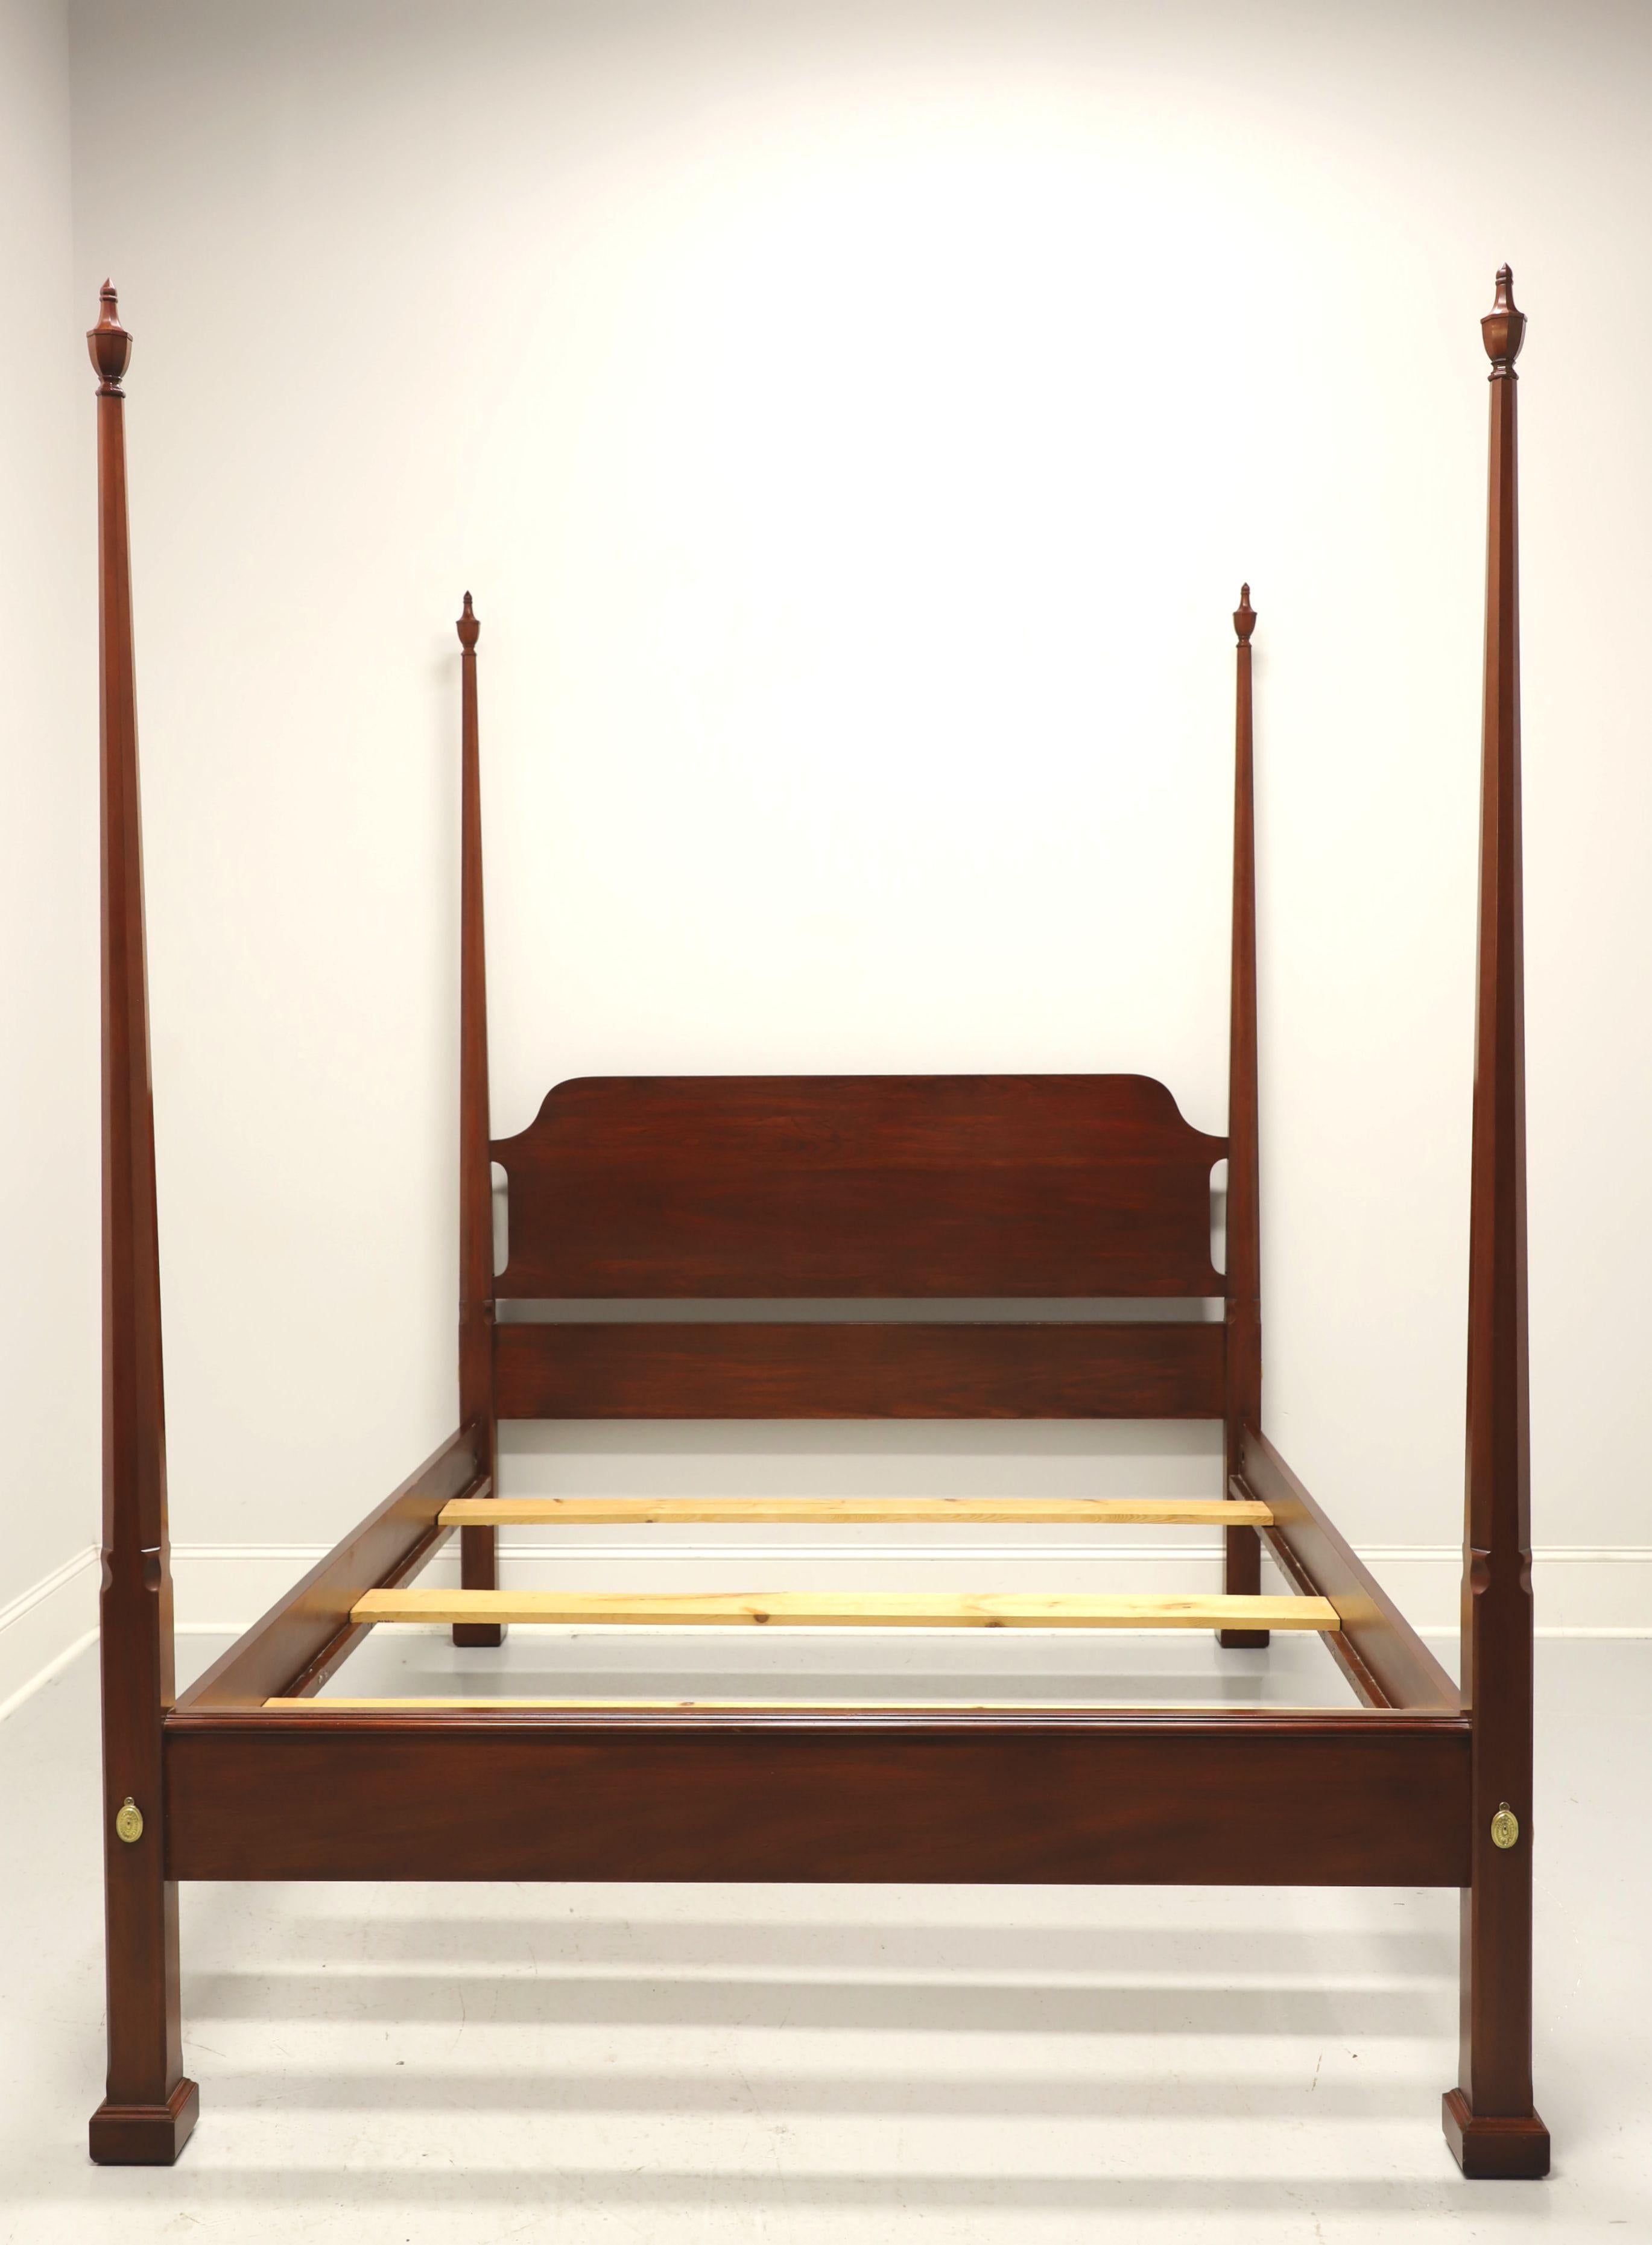 A Traditional style queen size pencil post bed by Henkel Harris, of Winchester, Virginia, USA. Solid wild black cherry with four pencil shaped posts with finials, brass covers to headboard & footboard, bolt held side rails with wood bracers and